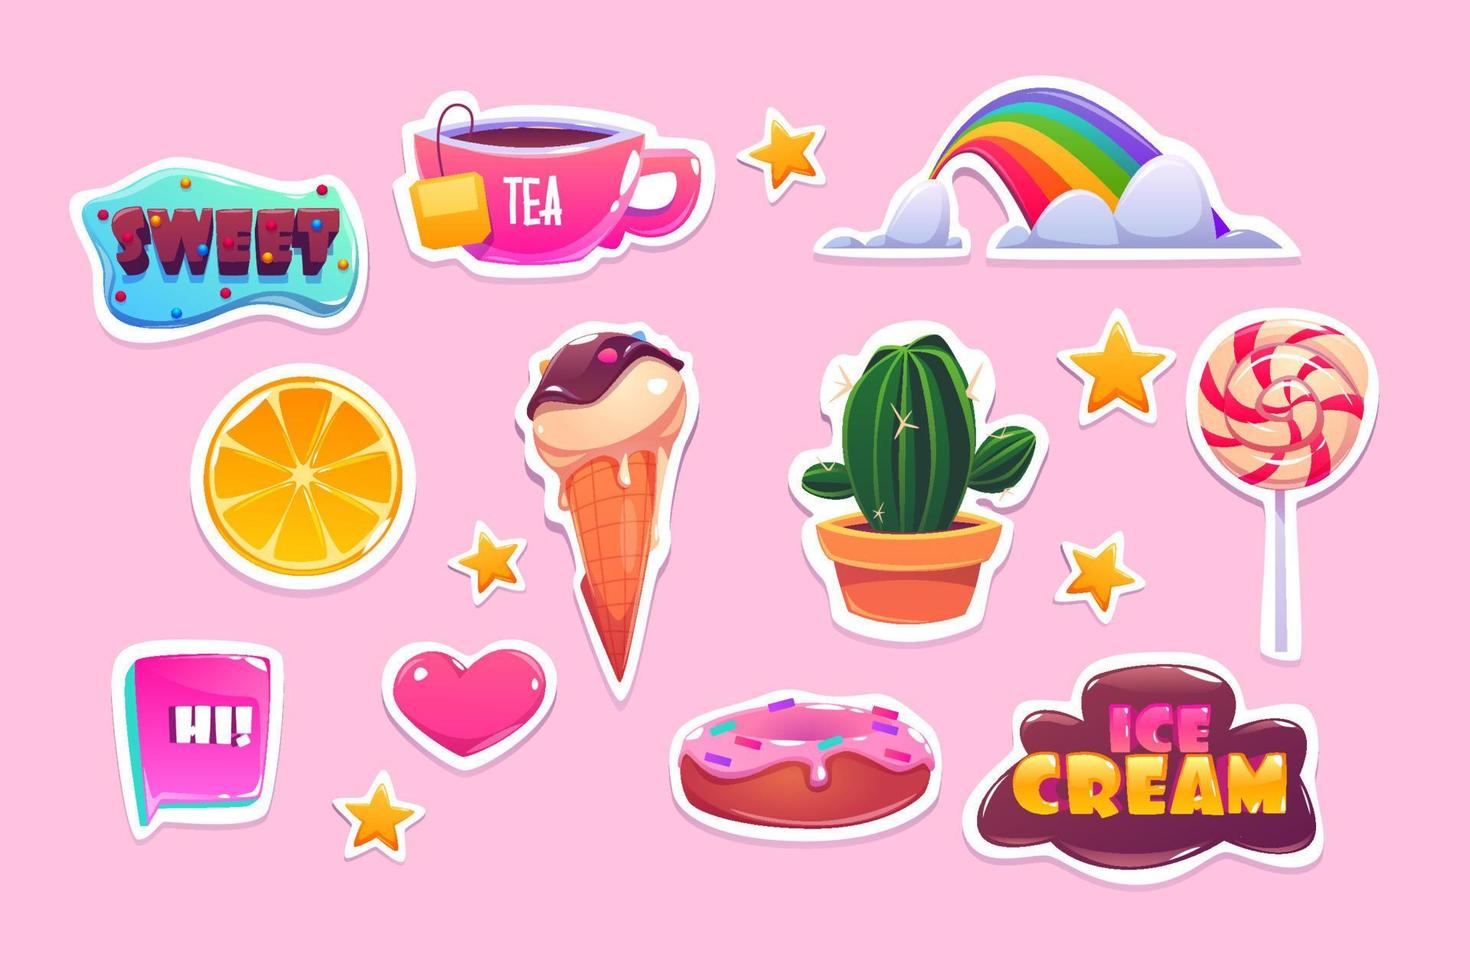 Cute stickers set with rainbow, heart and sweets vector